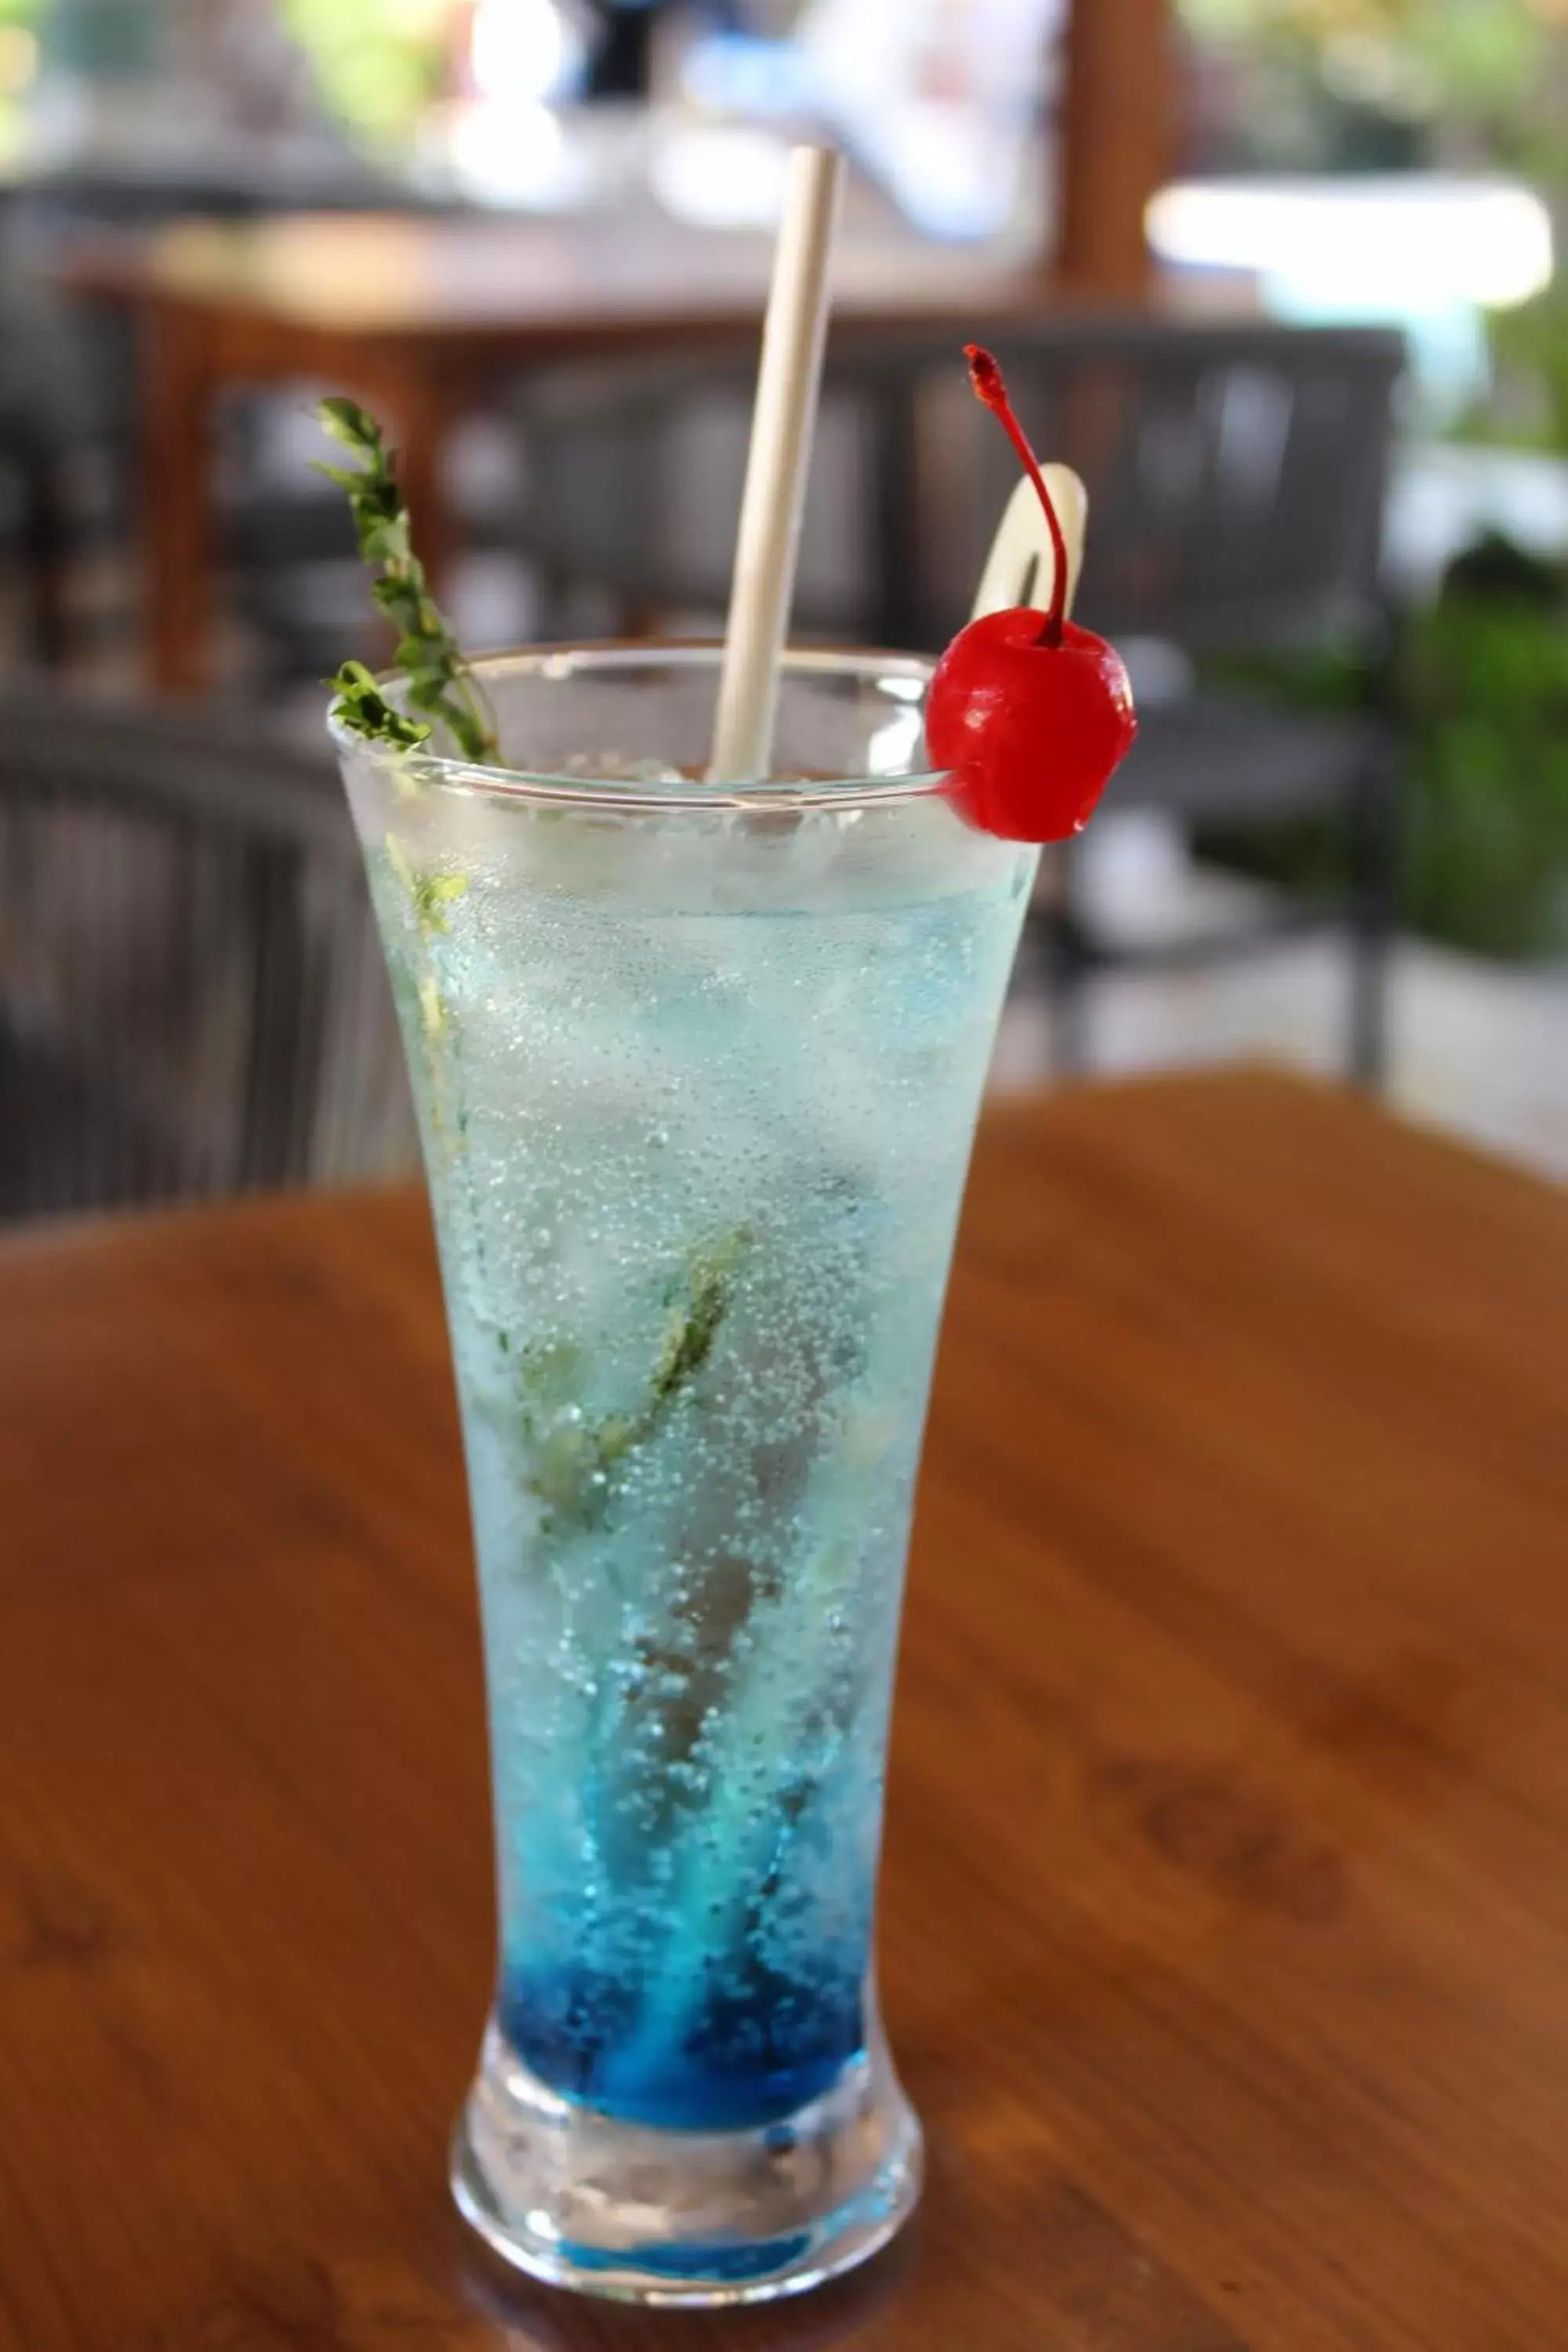 Food and drinks, Drinks in Puri Tempo Doeloe Boutique Hotel